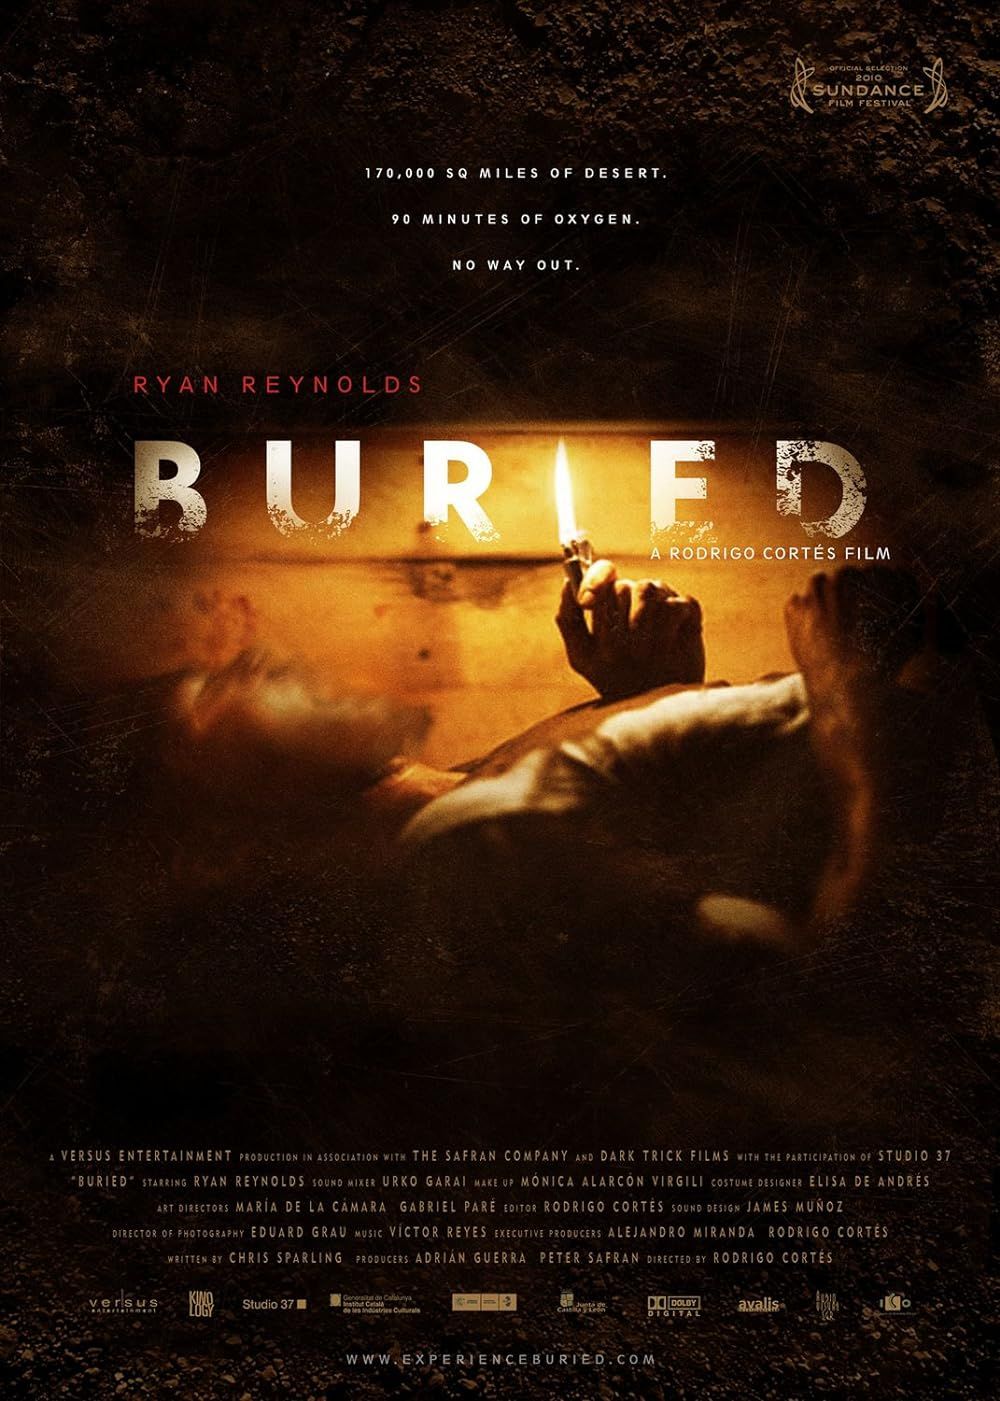 A man uses a lighter to see inside a buried box in the poster of Buried